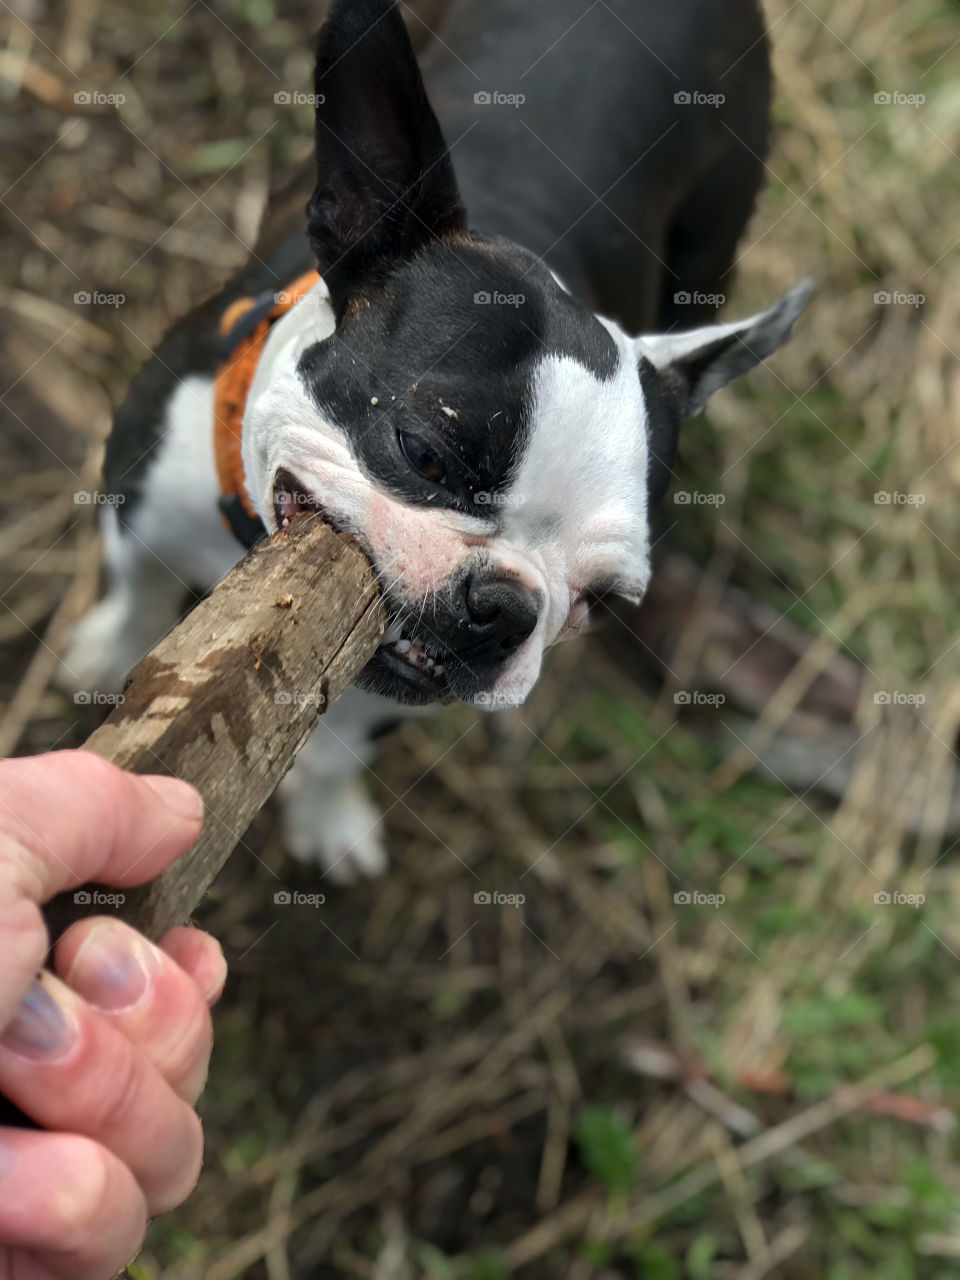 My little pup Boston Terrier loved to play at the beach. Tug of war with sticks of driftwood is one of her favourite games. Or she just likes to chew the wood to splinters. I never understand why her mouth isnt full of splinters!